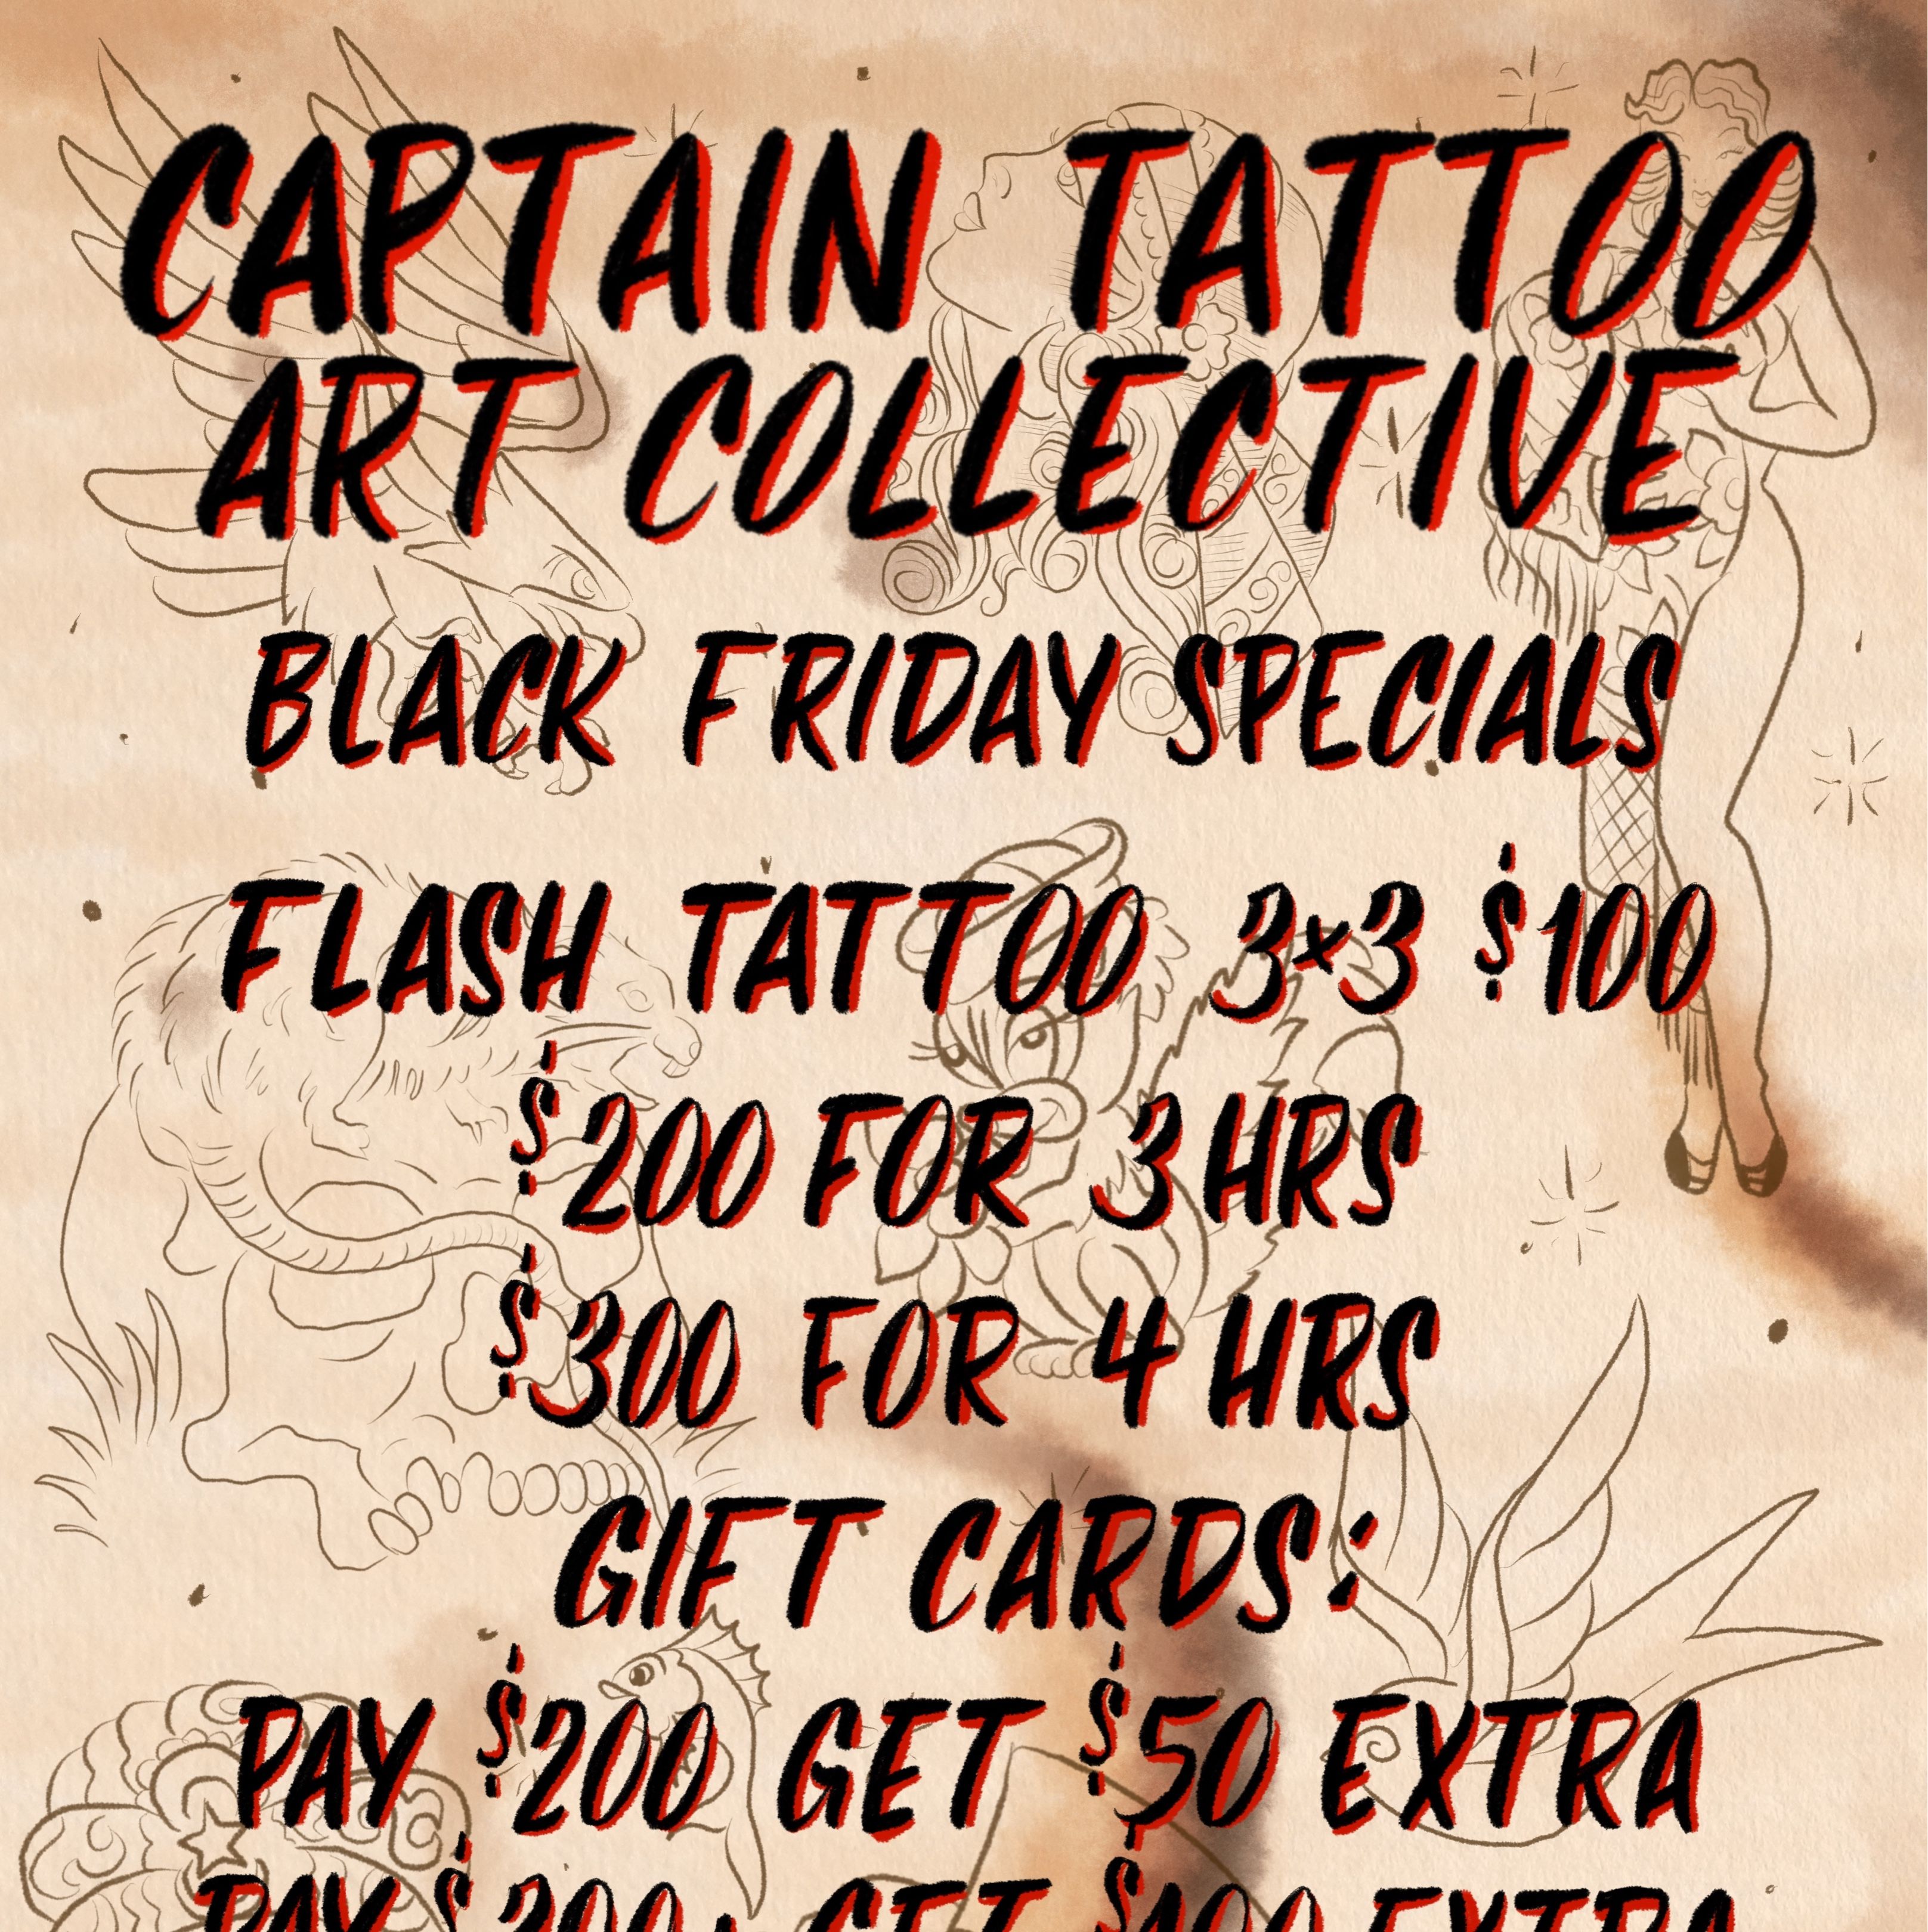 Captain Tattoo Art Collective captaintattooartcollective  Instagram  photos and videos